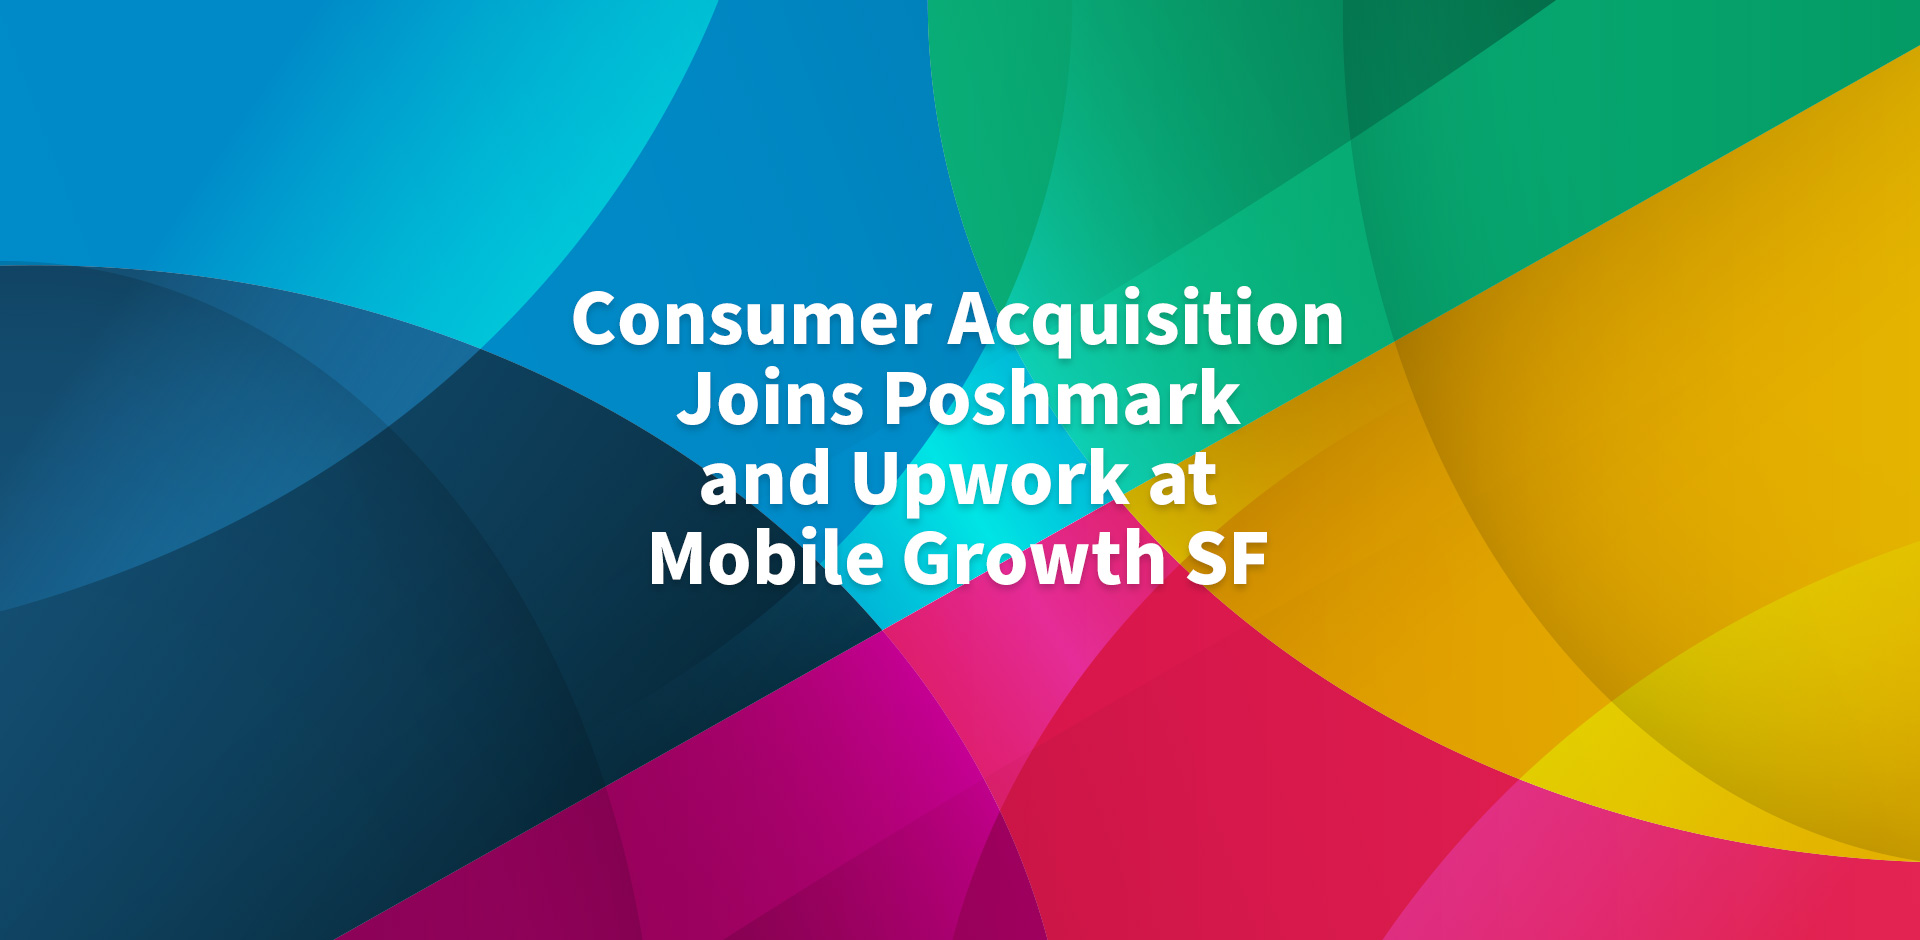 Consumer Acquisition joins Poshmark and Upwork at Mobile Growth SF